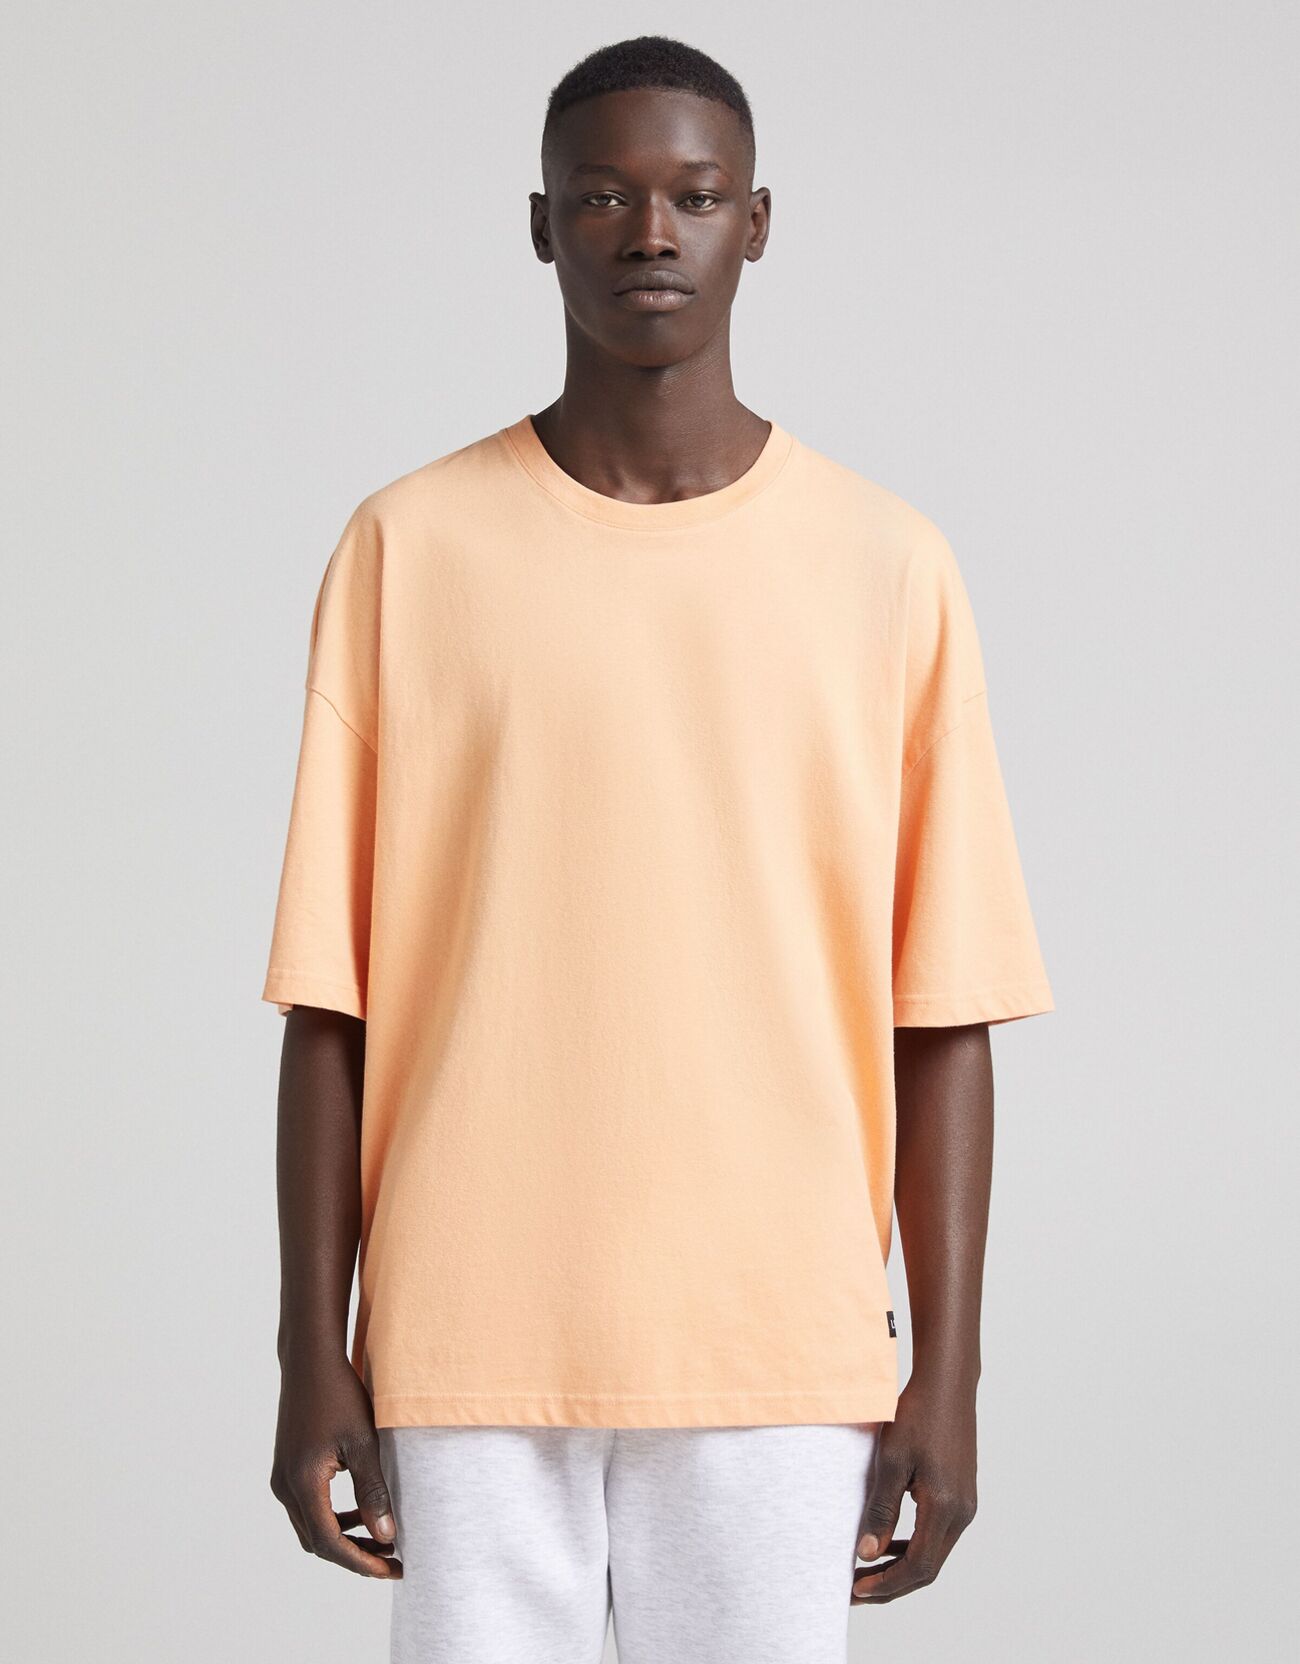 Bershka T-Shirt Manches Courtes Extra Loose Homme S Orange